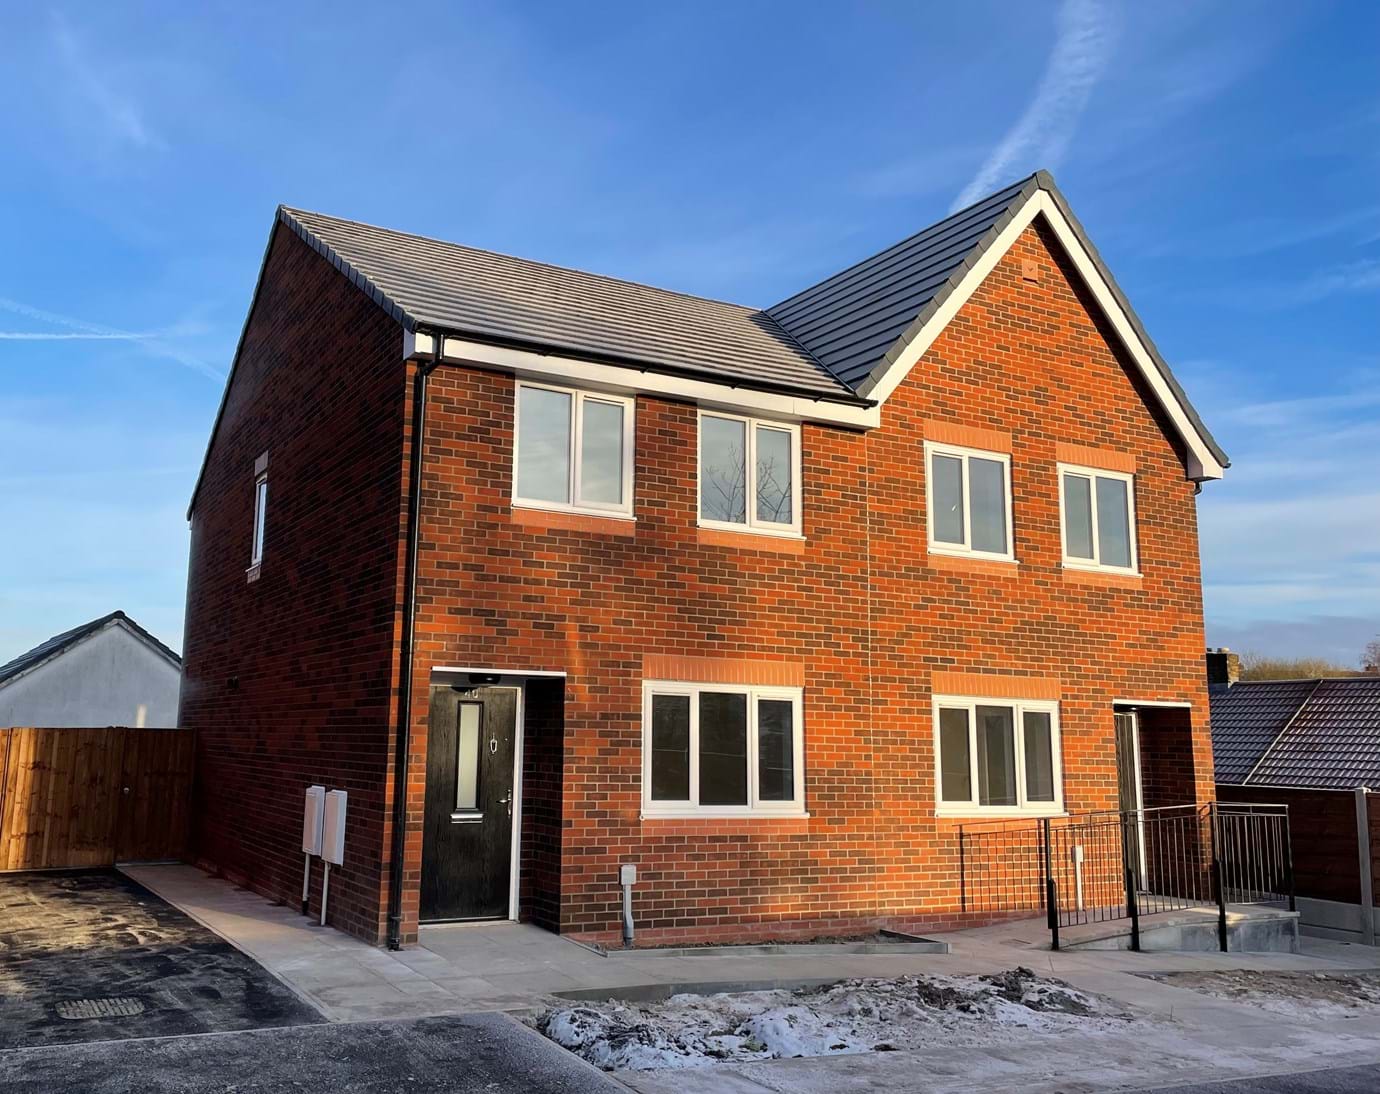 Tanners Fold development of 24 three bedroom family houses for affordable rent